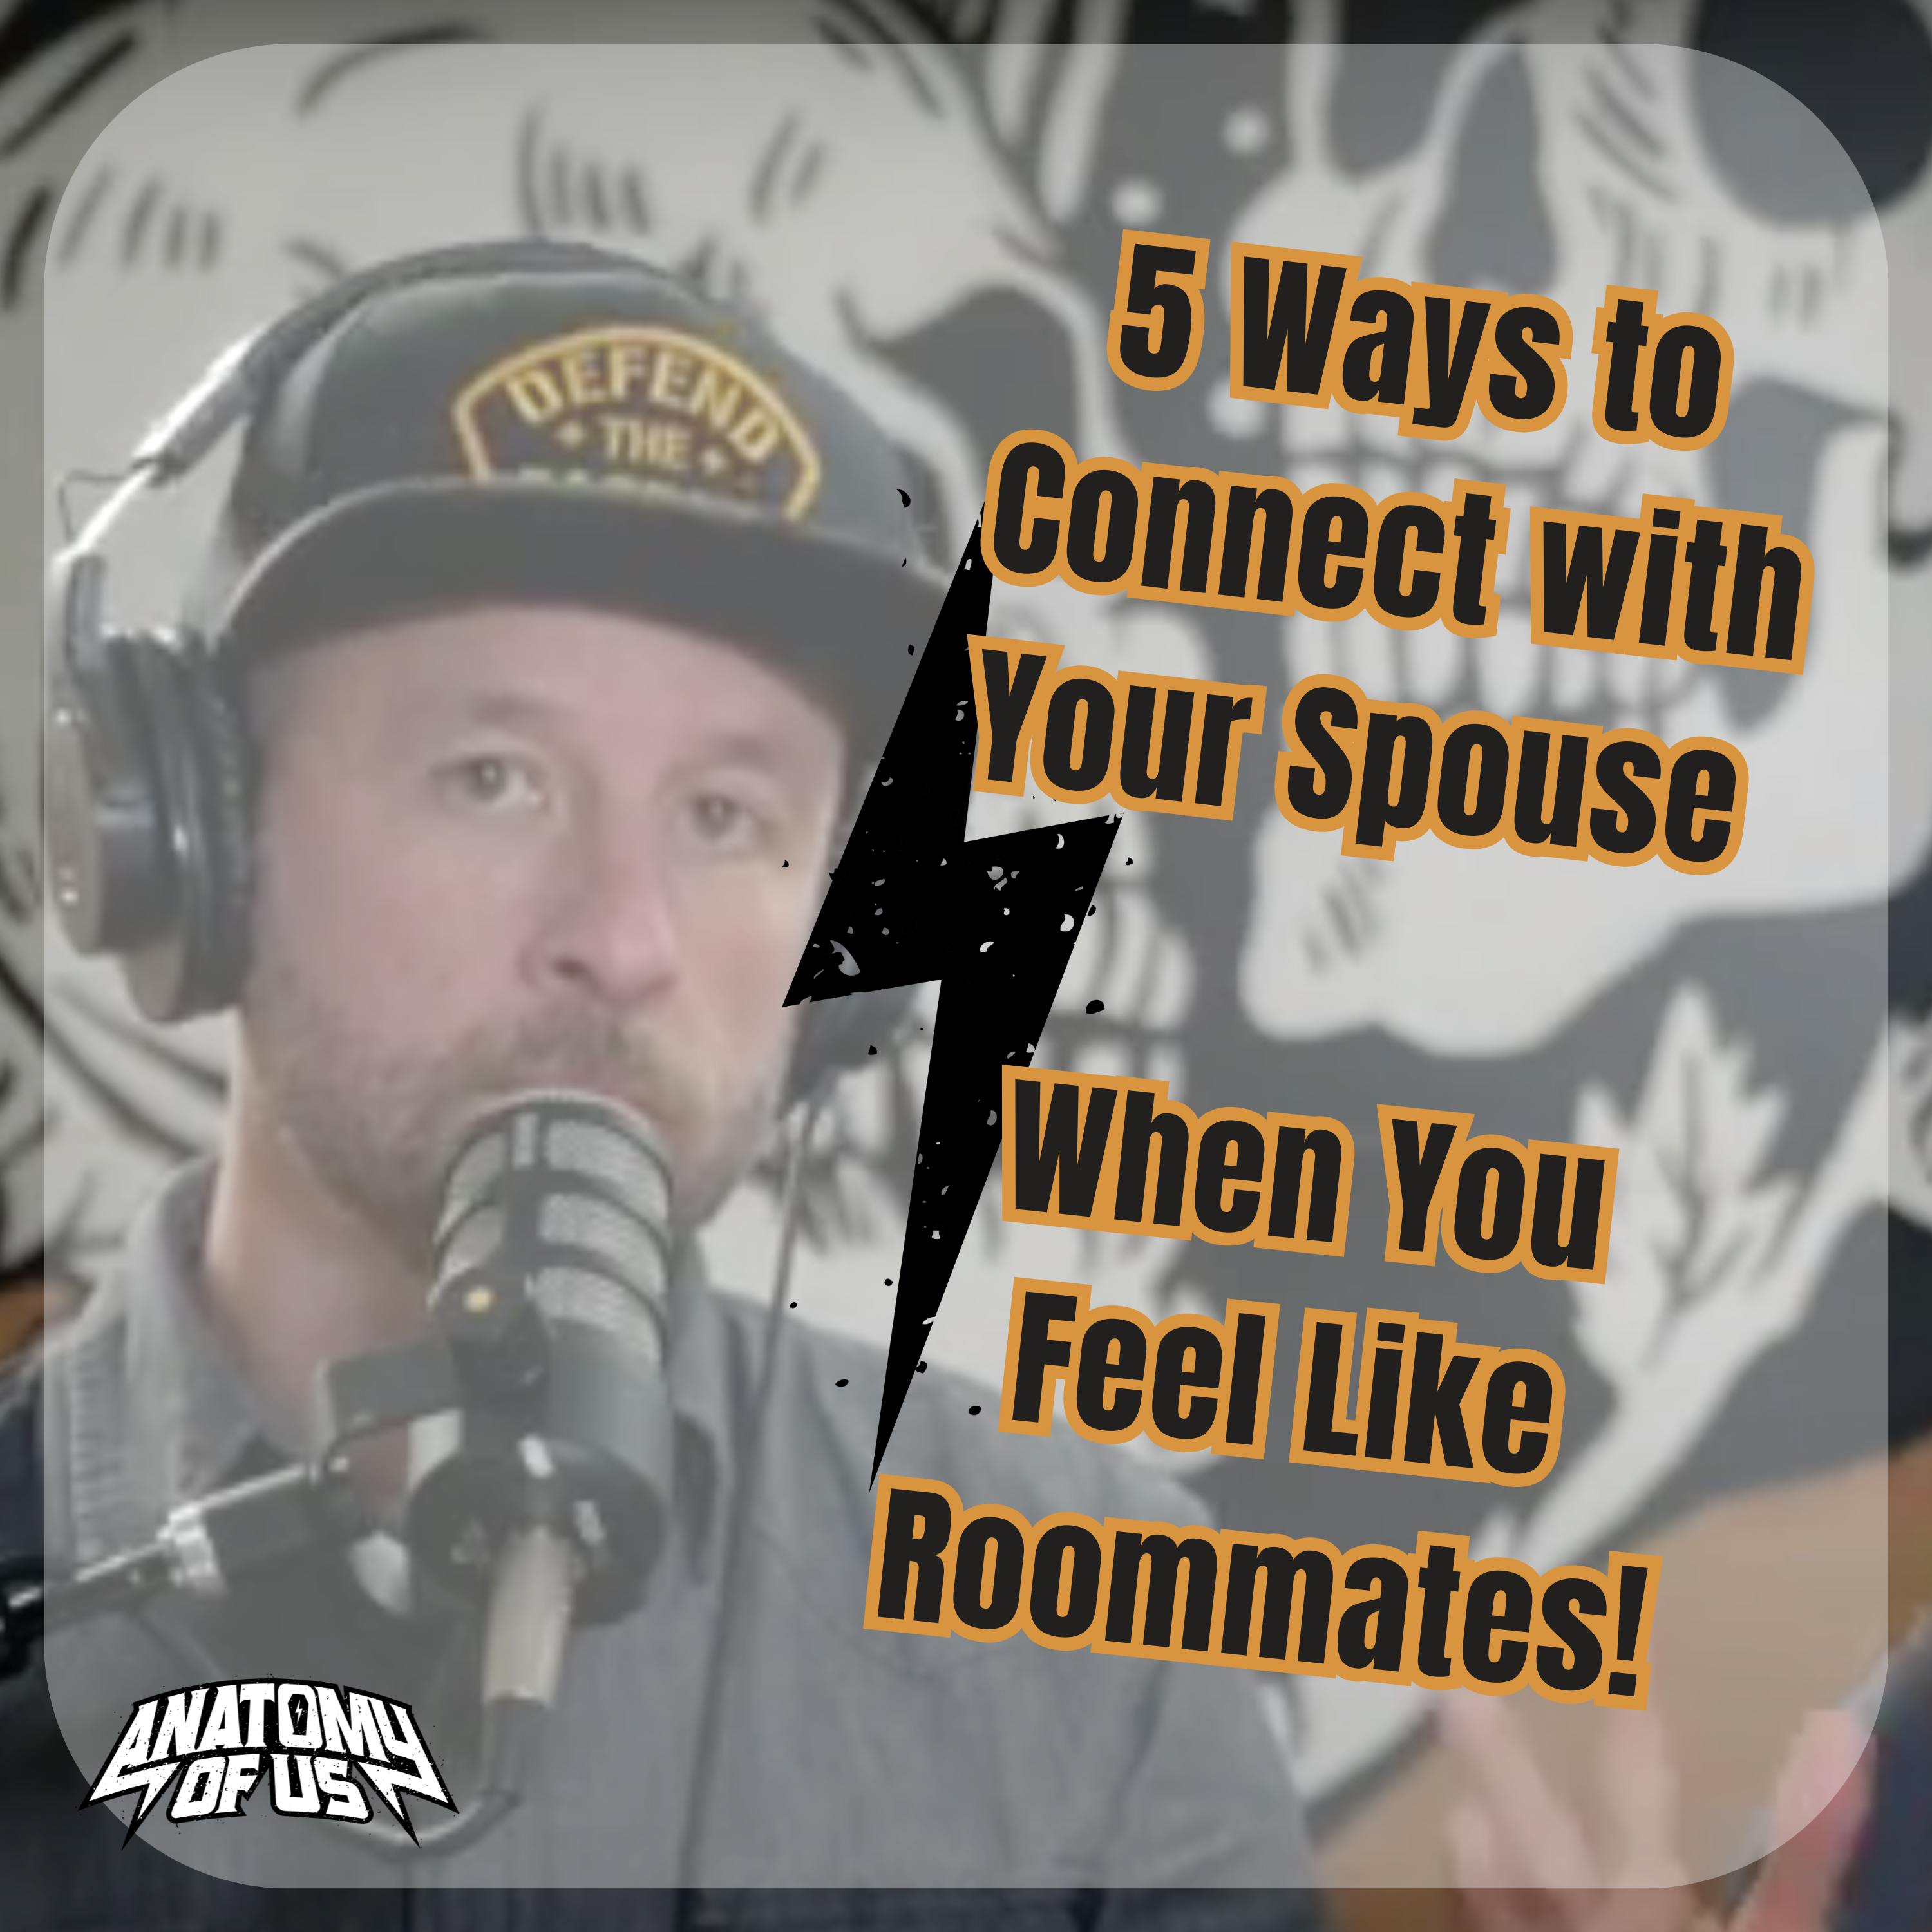 5 Ways to Connect with Your Spouse When You Feel Like Roommates!